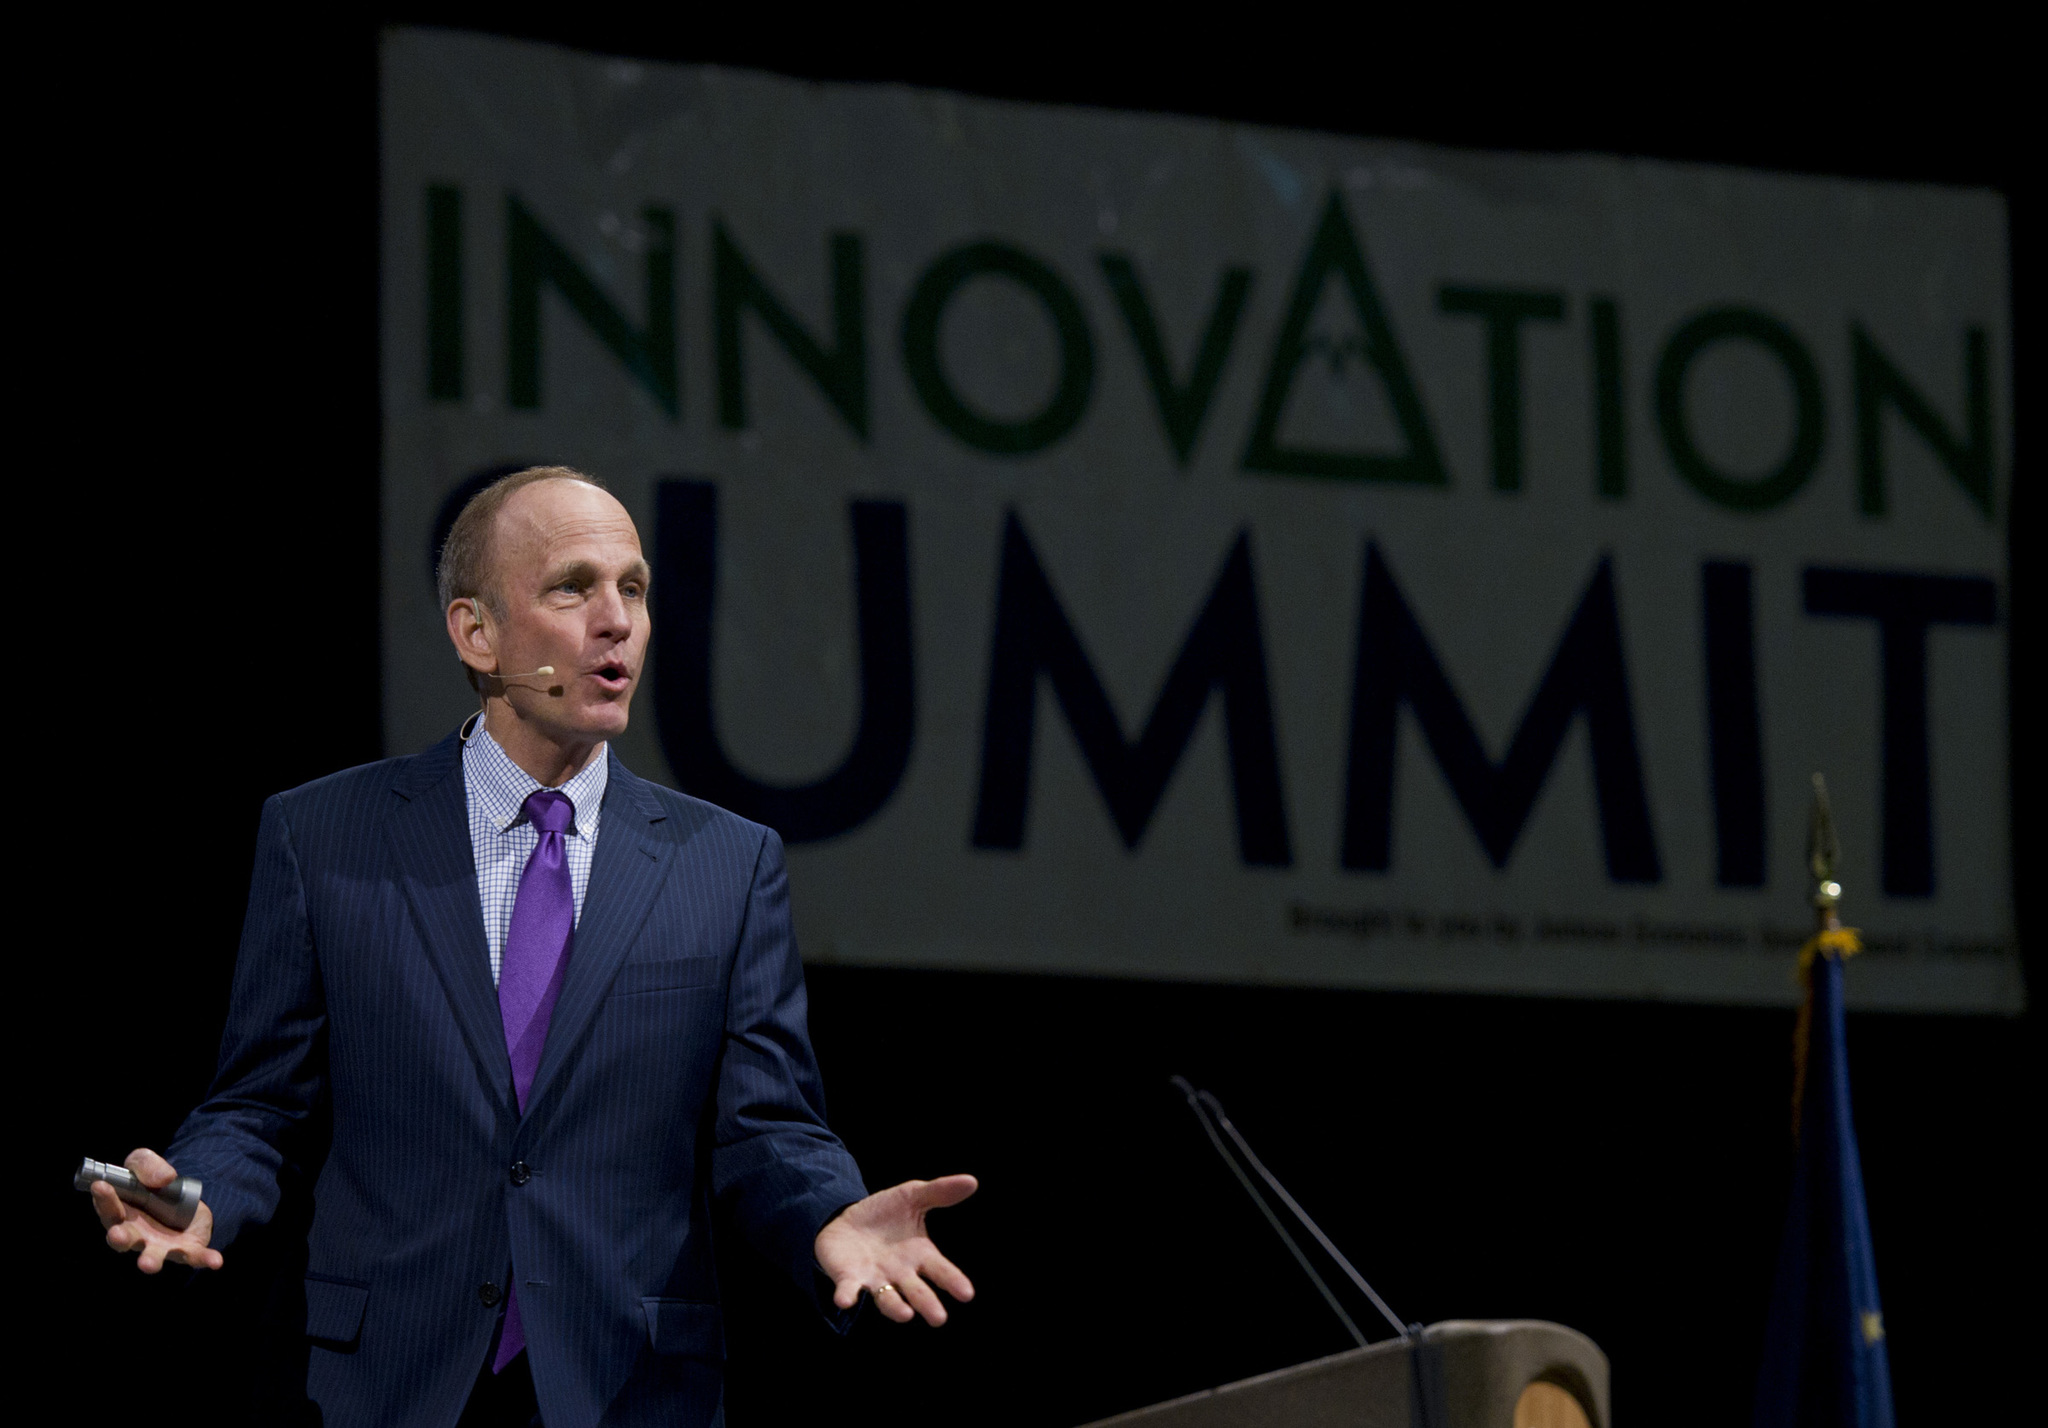 Robert Tucker gives the opening speech titled “Innovation is Everyone’s Business” at the Innovation Summit at Centennial Hall on Wednesday. The summit is a two-day conference bringing entrepreneurs together sponsored by the Juneau Economic Development Council. Tucker is president of The Innovation Resource and a former adjunct professor at the University of California, Los Angeles.